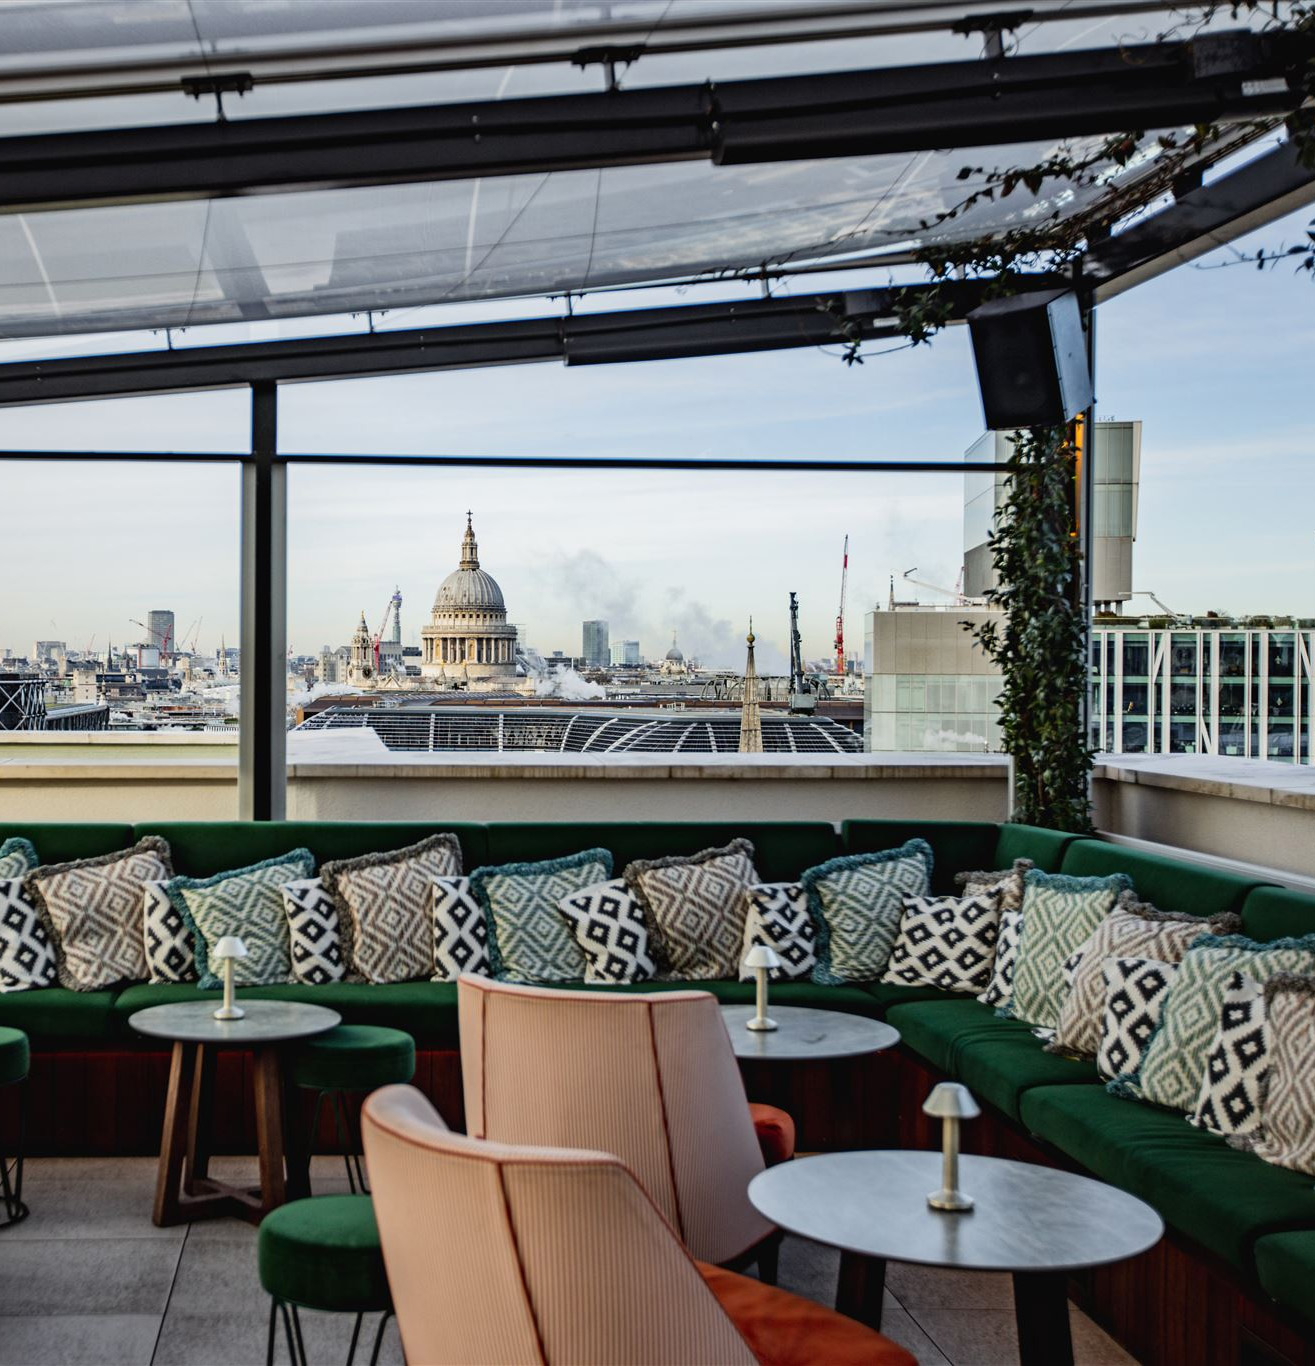 ETM Weddings - The Wagtail sheltered dining area with Green velvet couches overlooking St Paul's Iconic dome.